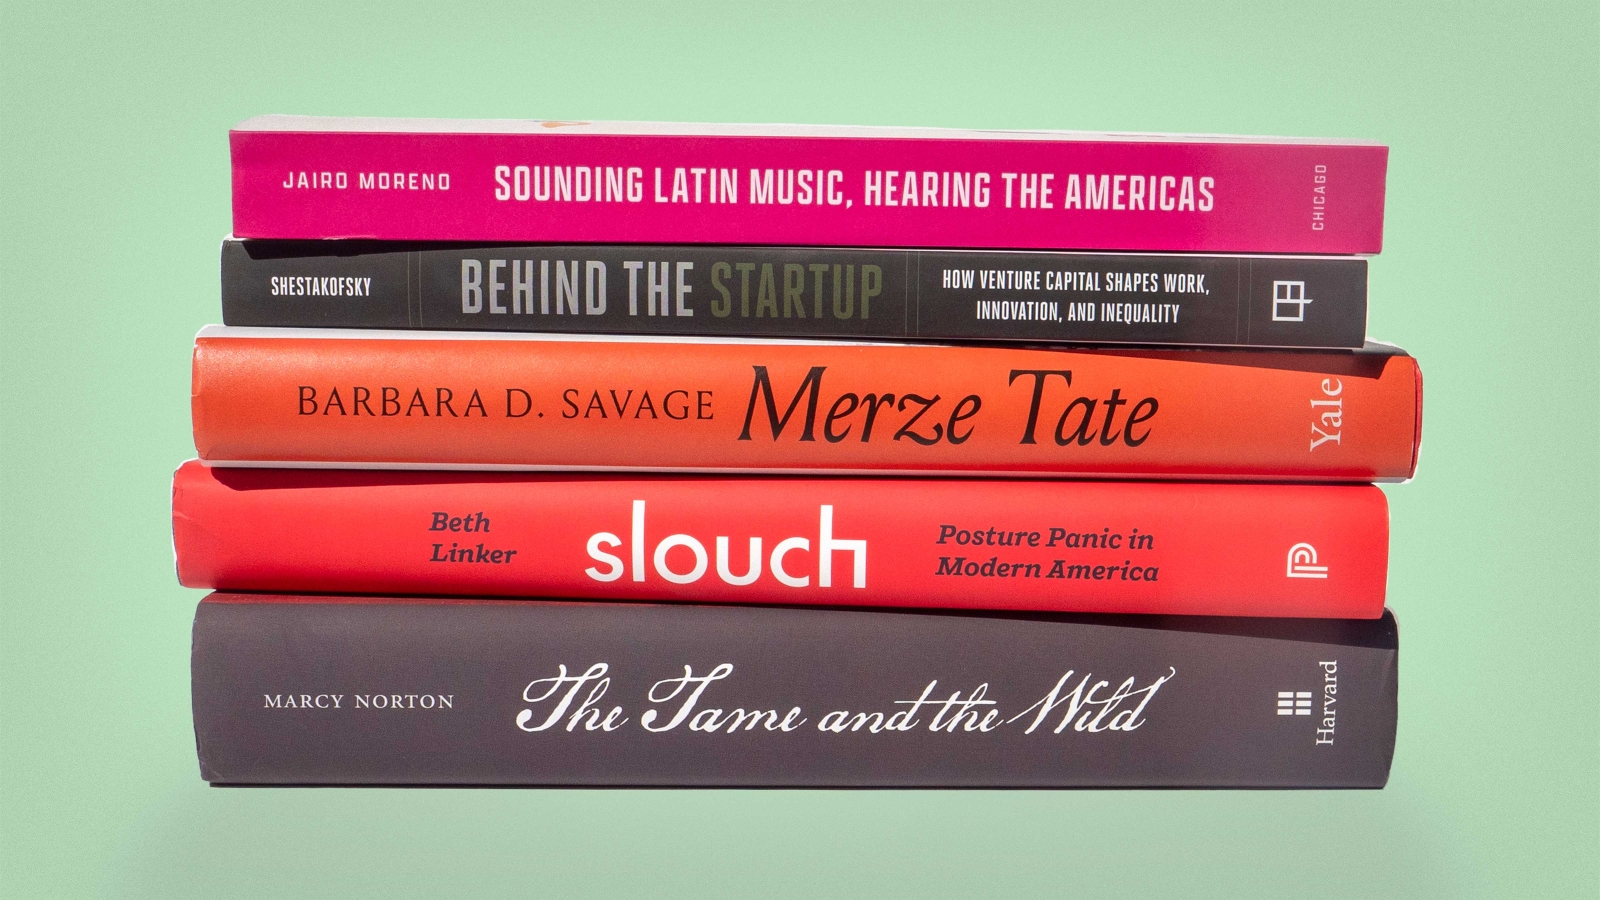 A stack of books on a light green background. The books read, from top to bottom: "Jairo Moreno: Sounding Latin Music, Hearing the Americas", "Shetakofsky: Behind the Startup; how venture capital shapes work, innovation, and inequality", "Beth Linker: slouch; Posture Panic in Modern America", and "Marcy Norton: The Tame and the Wild".